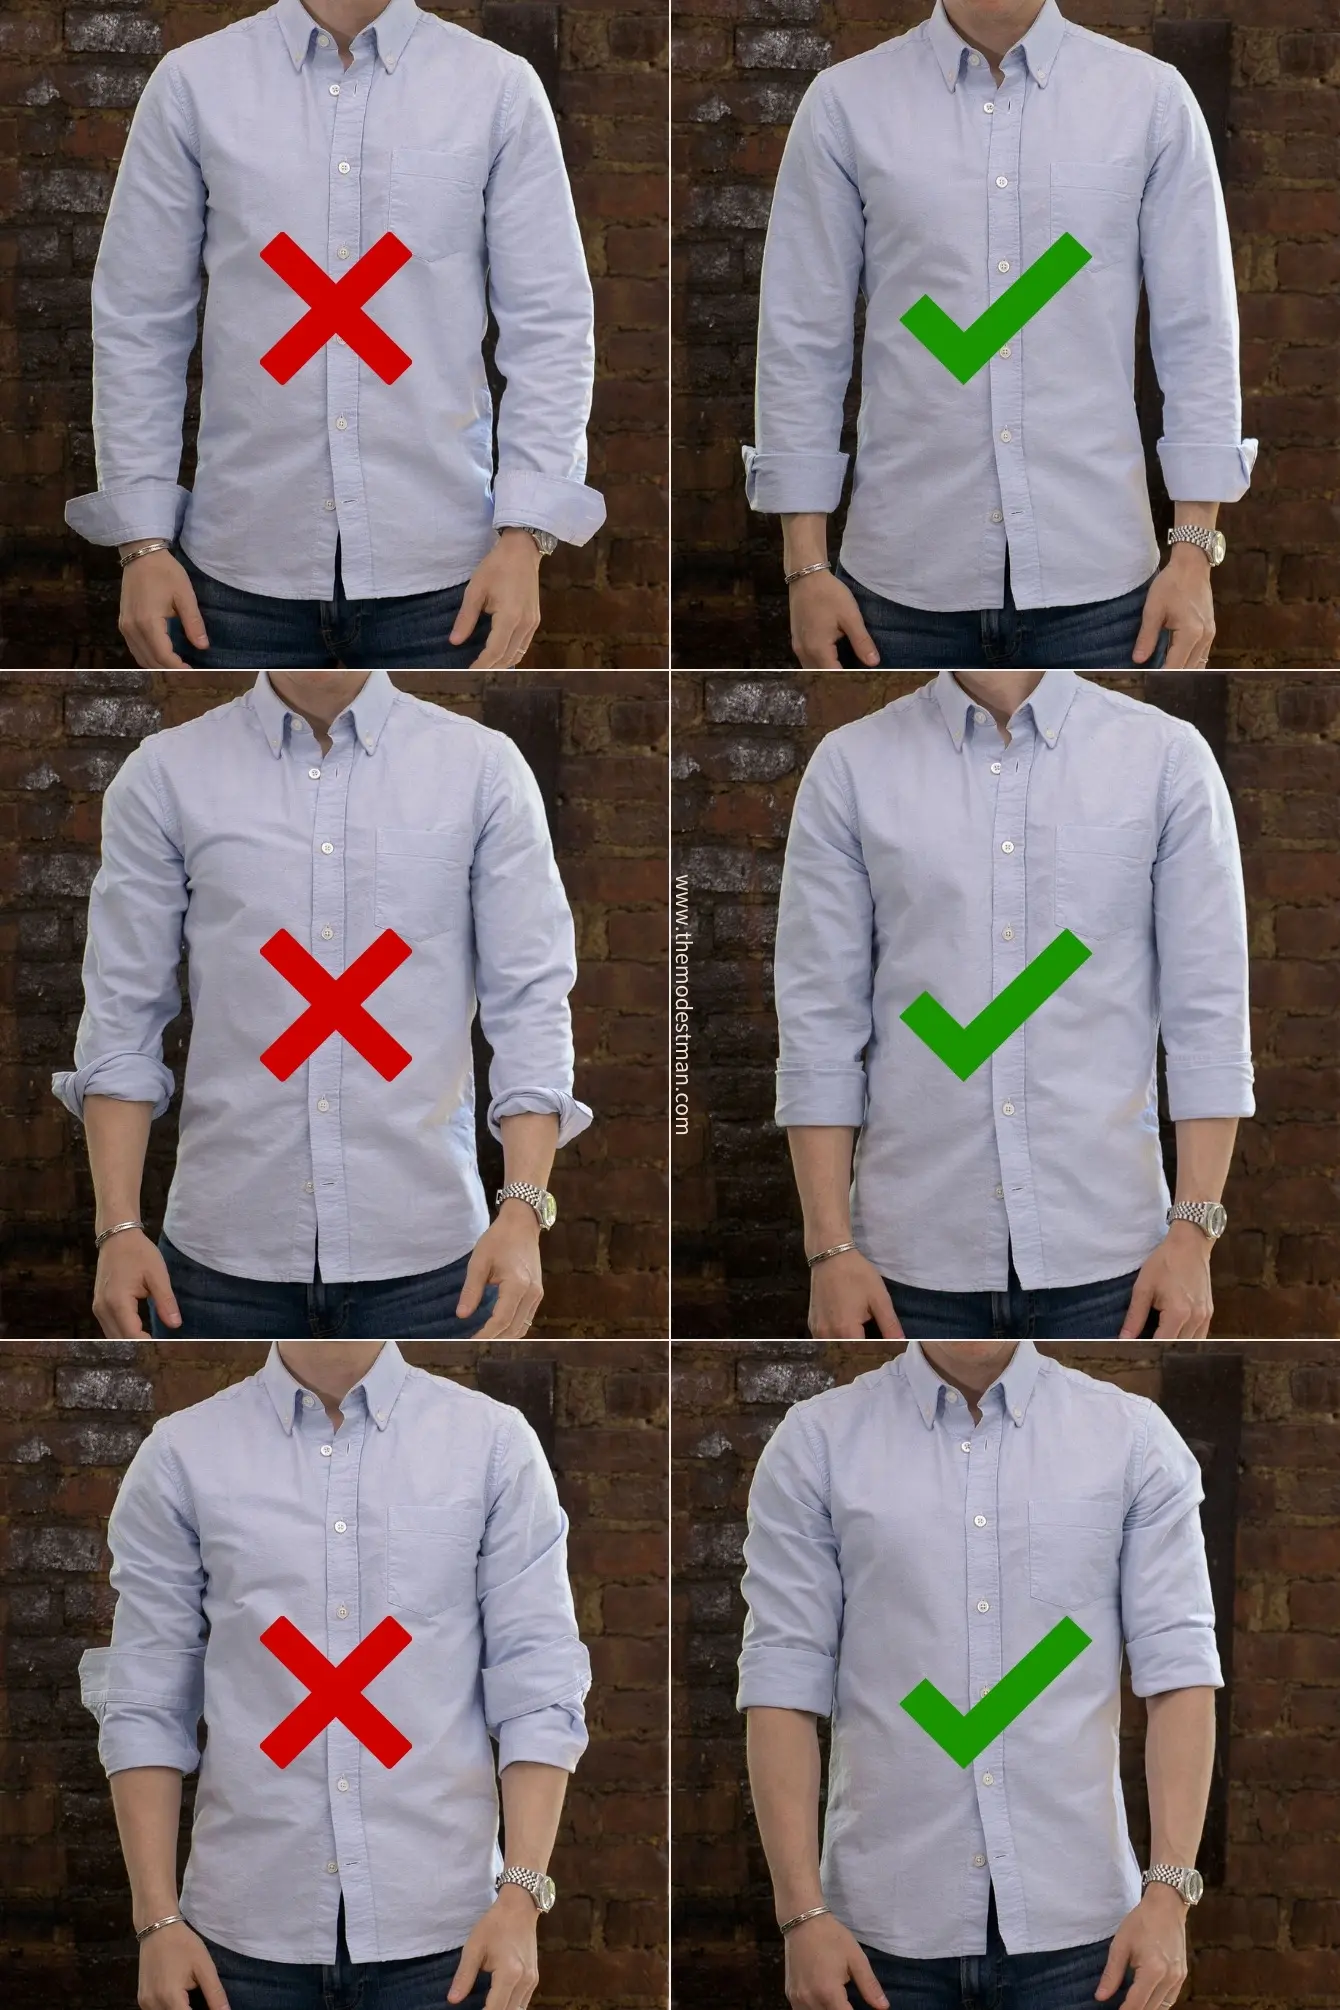 How to roll your sleeves up